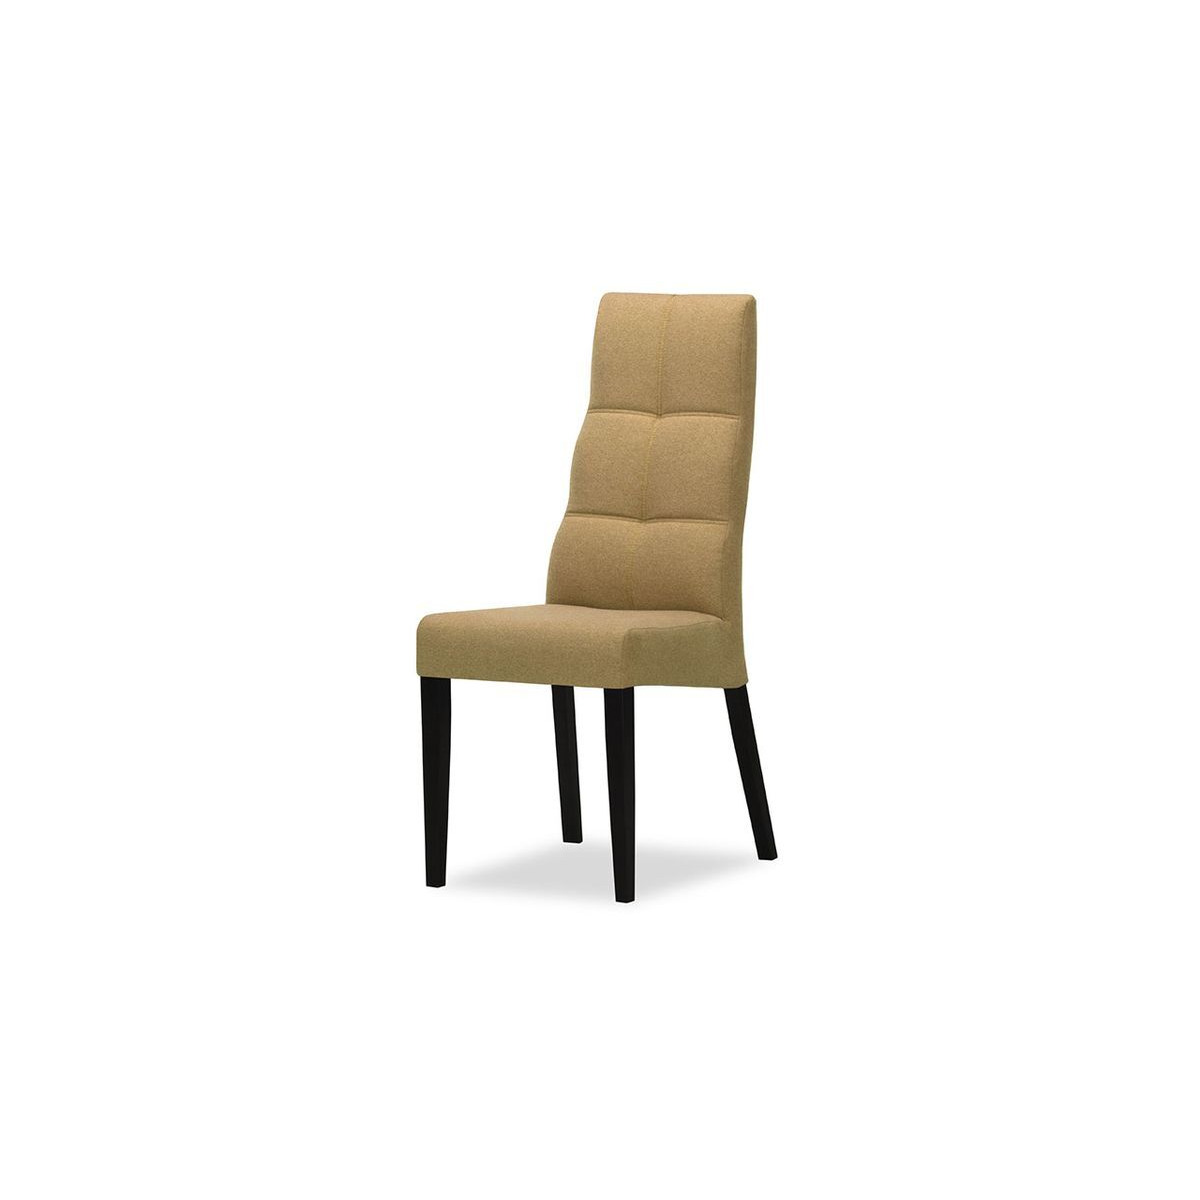 Dilo Dining Chair, yellow, Leg colour: white - image 1